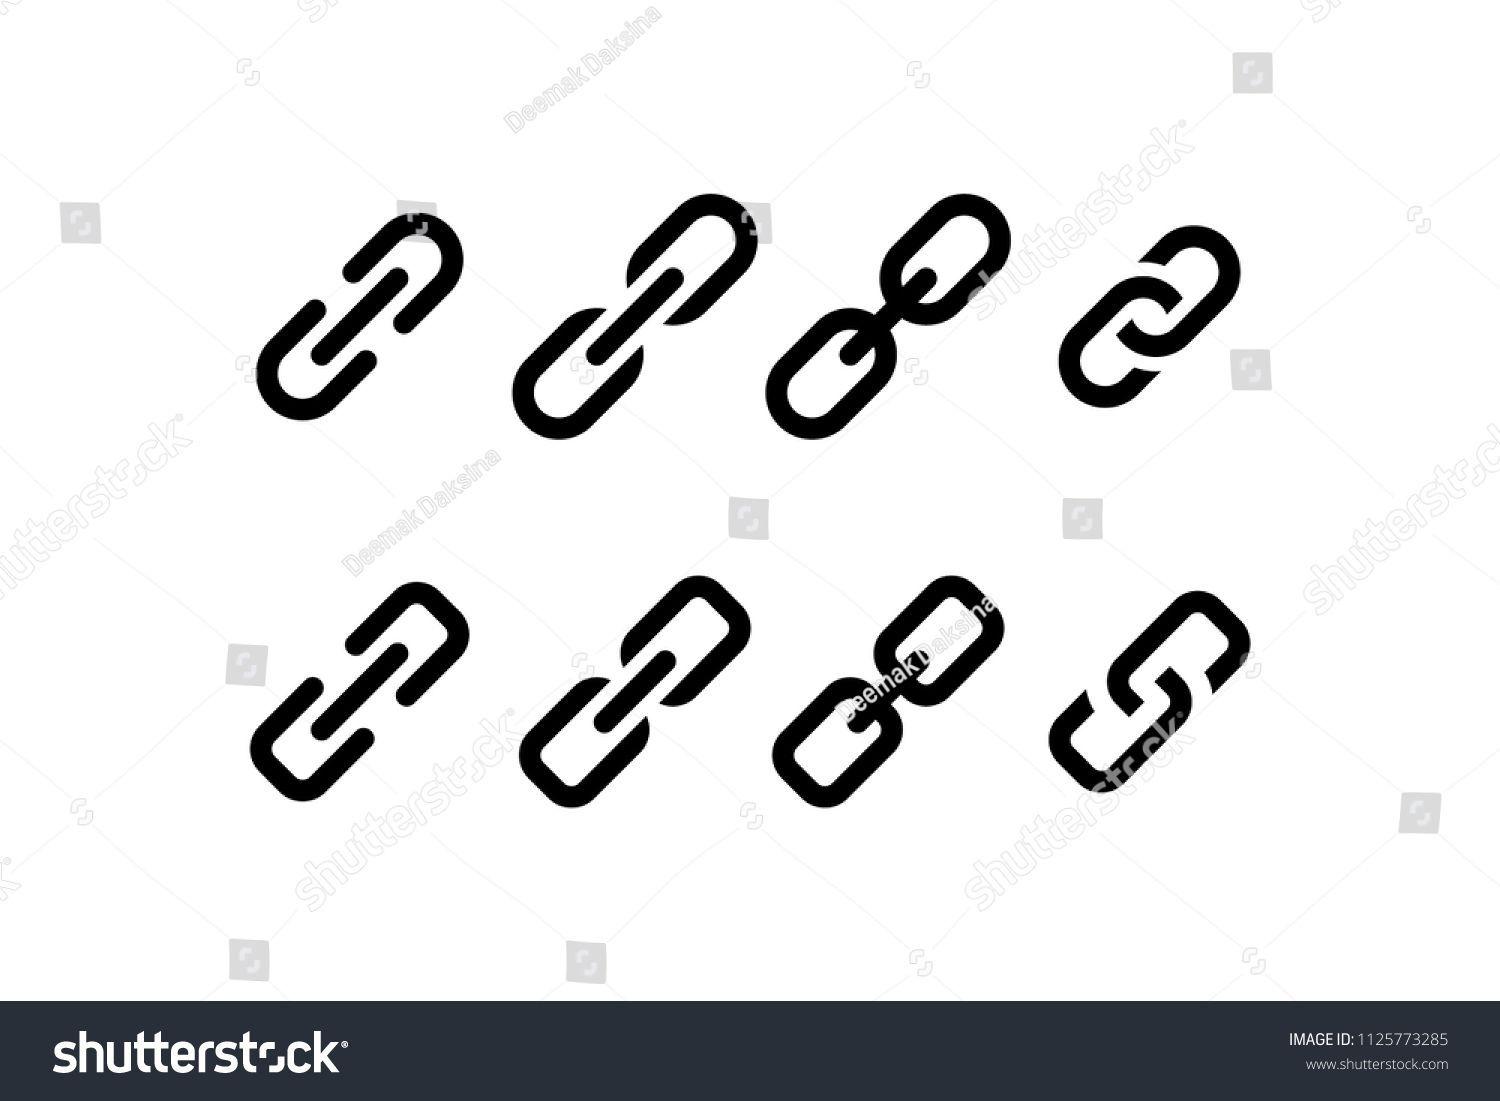 Hyperlink Logo - Chain / Link Icon Set. link, chain, connection, linked, hyperlink ...